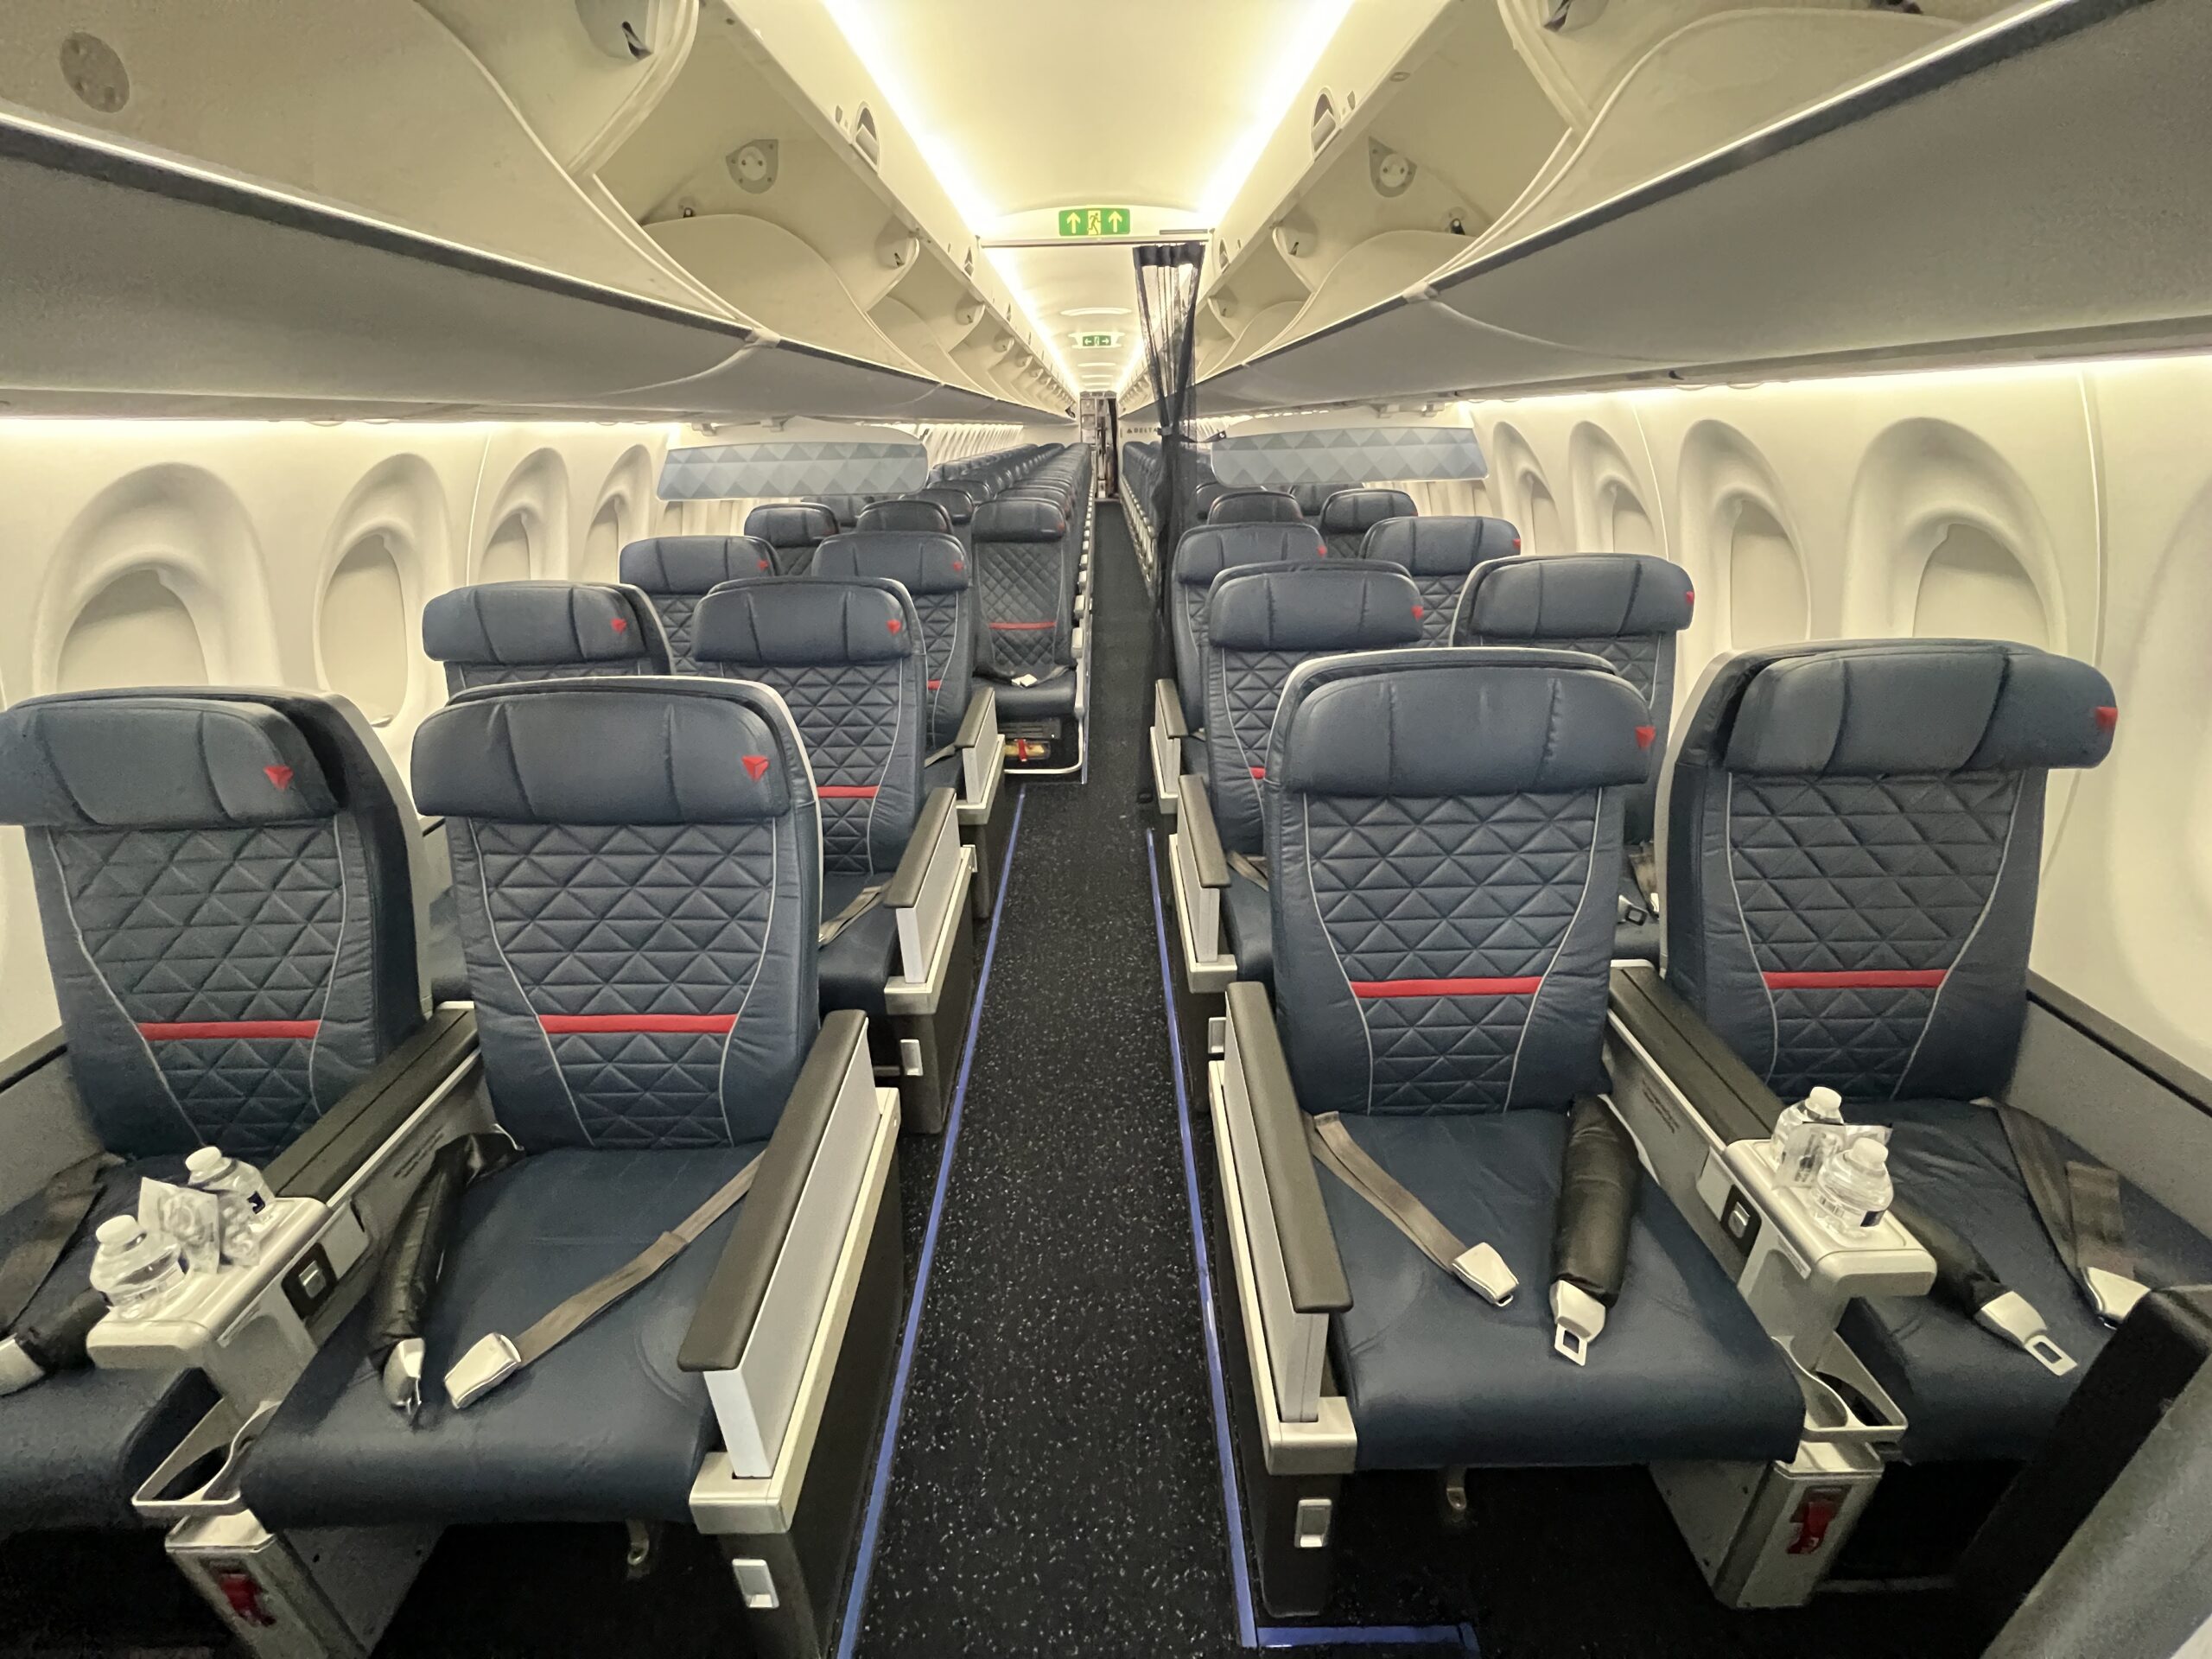 Forget Upgrades. Delta is Selling 74% of First Class Seats - The ...